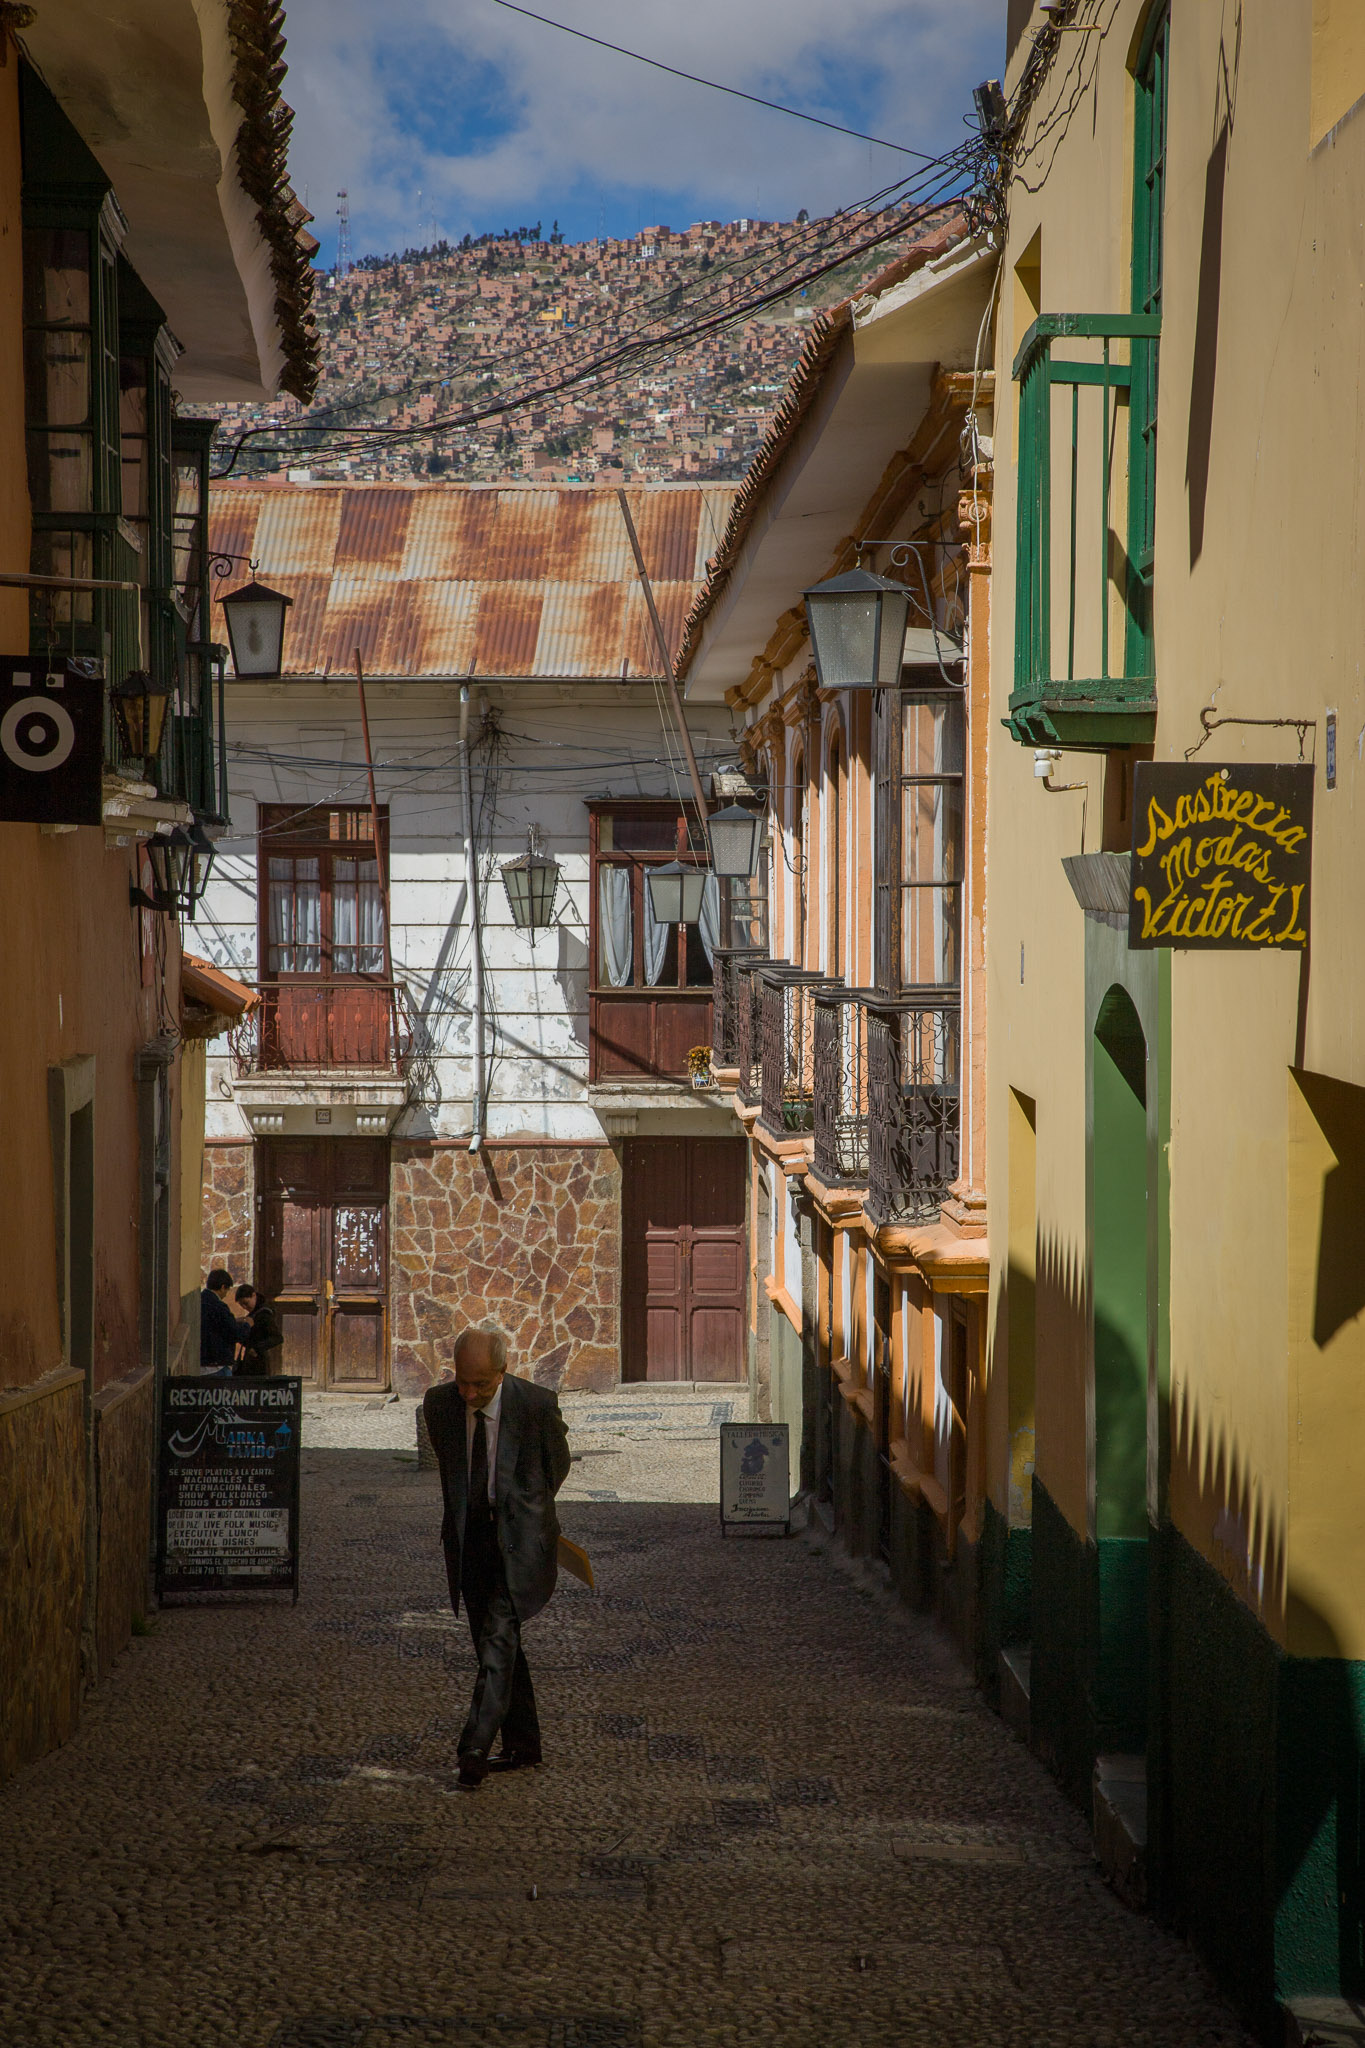 Calle Jaen (note crowded hills in background)